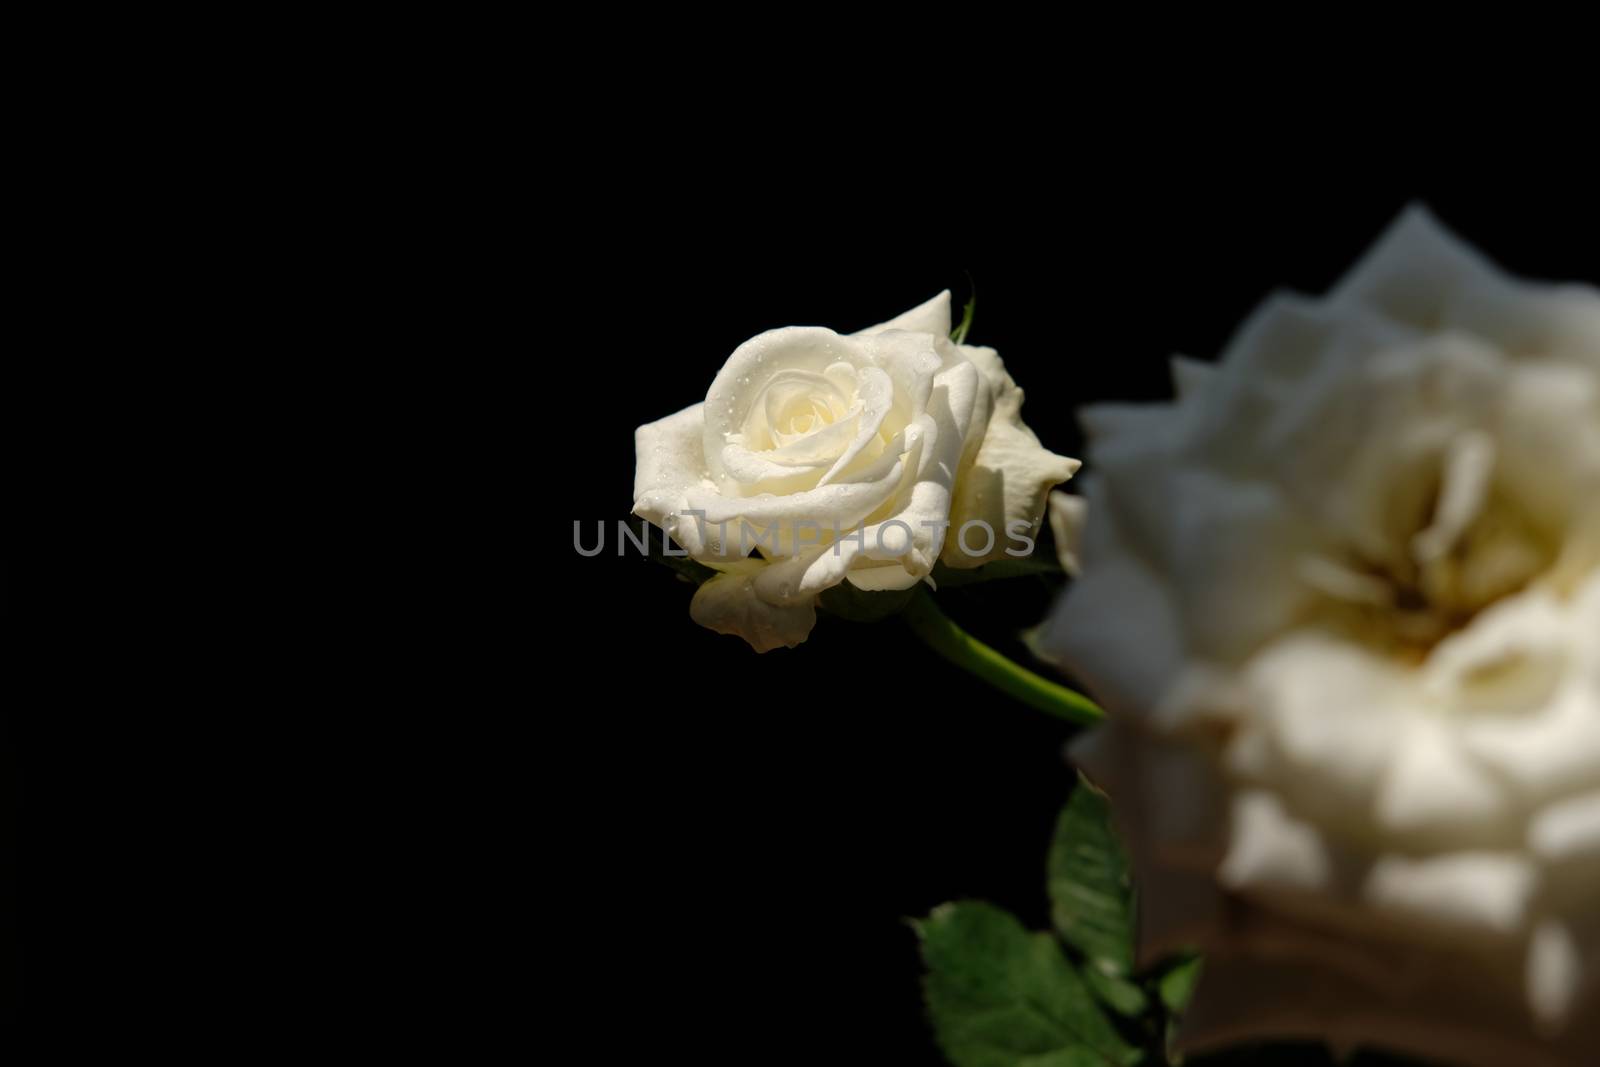 white rose flower with stem and leaves isolated on black background by Macrostud